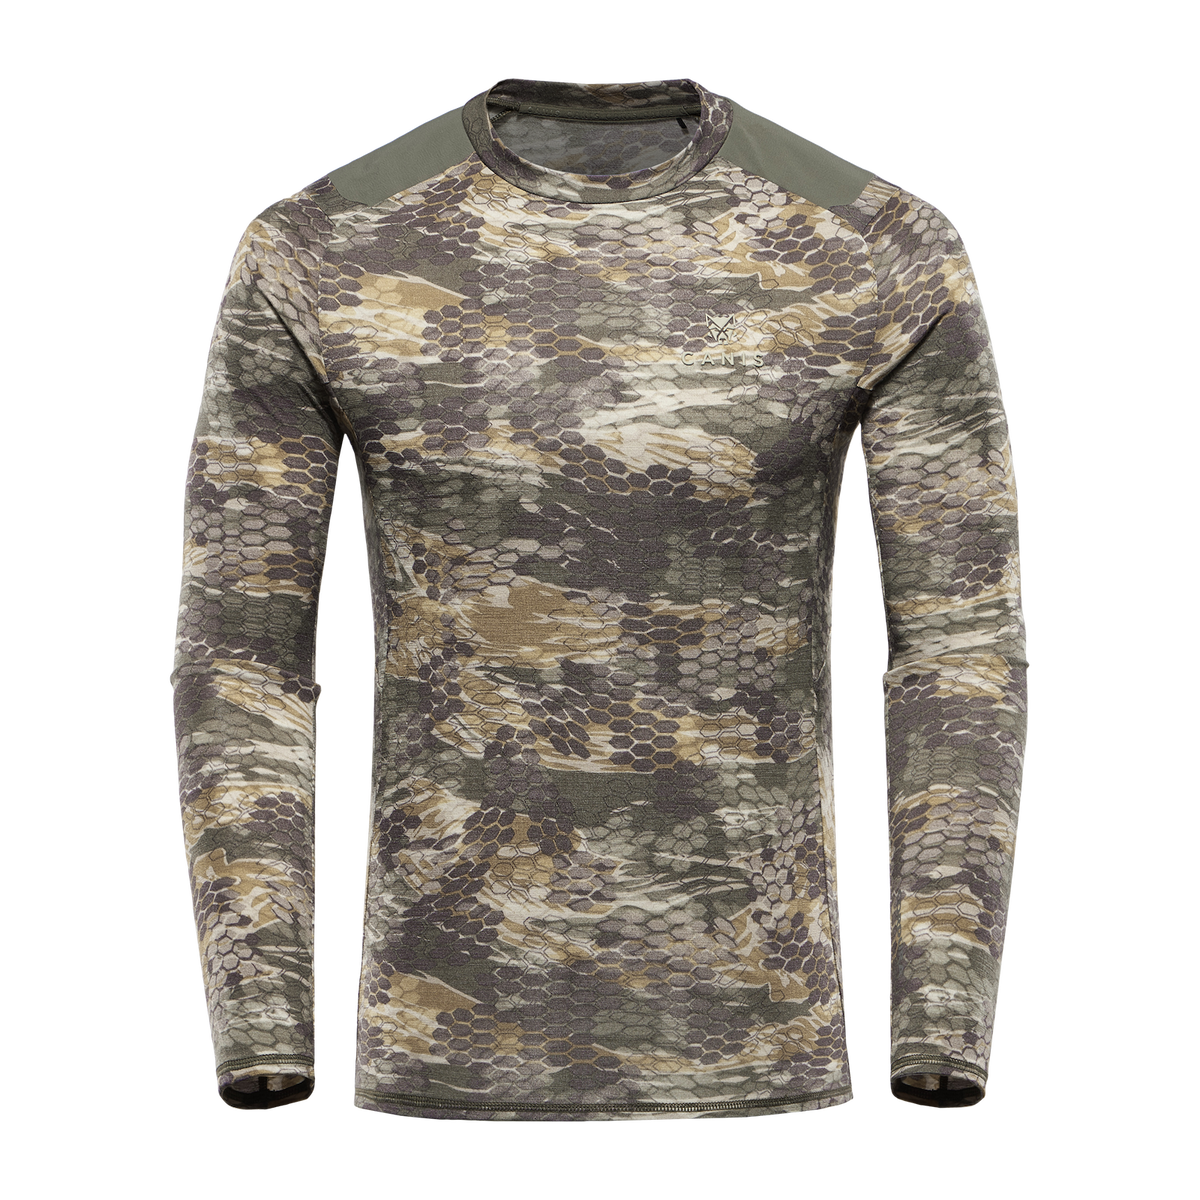 Icon Tigers Blood Gray Camo Jersey Size 3X-Large 